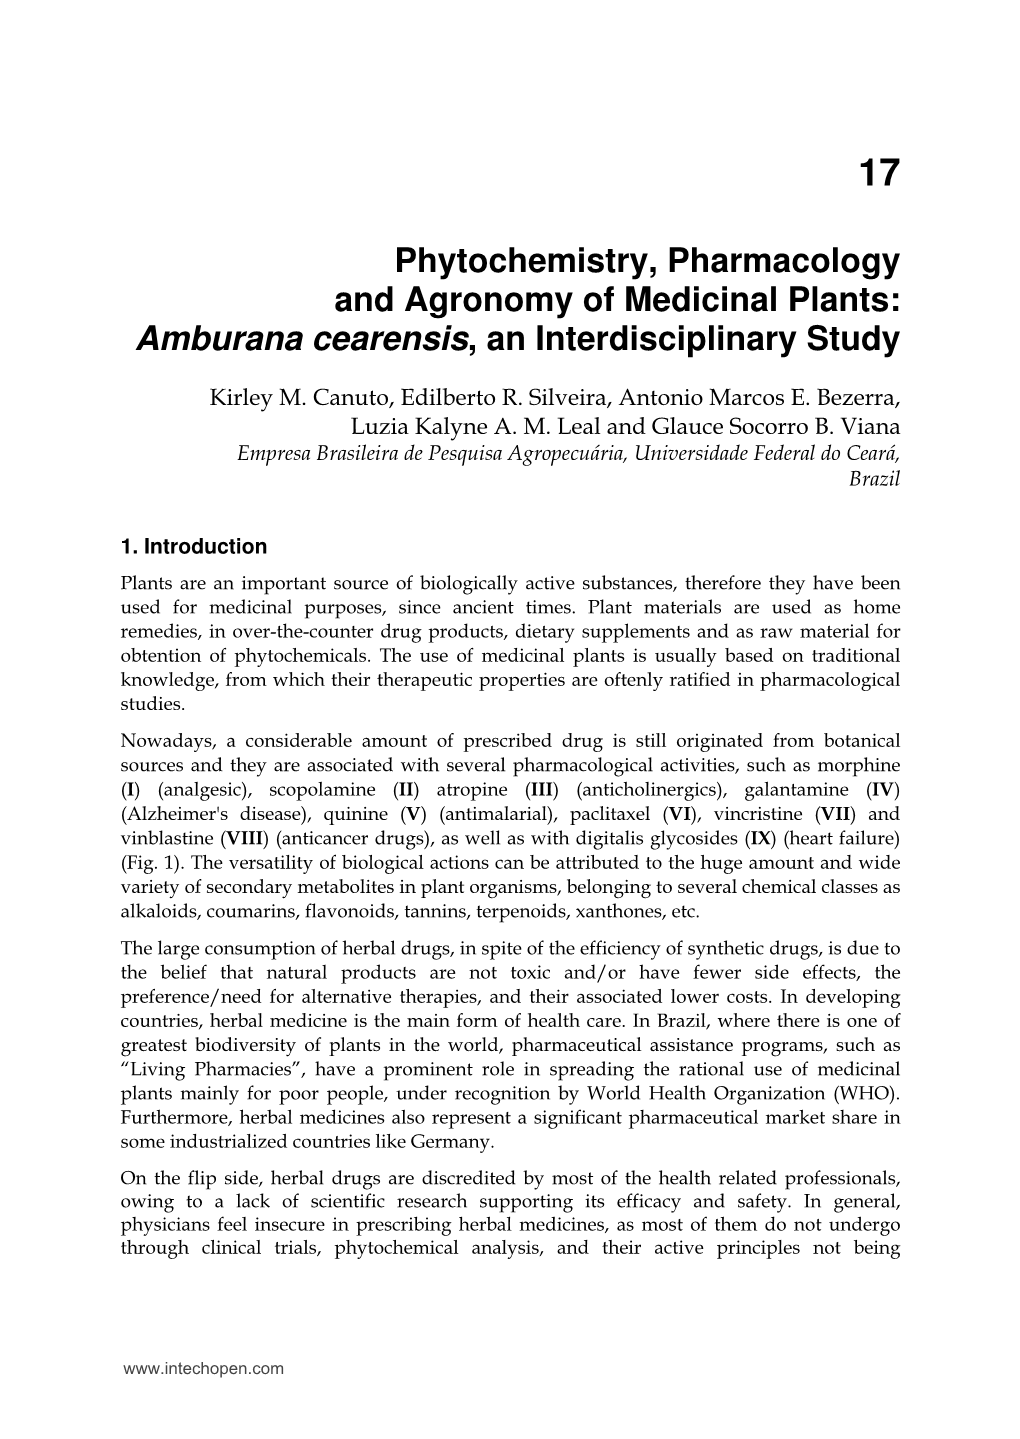 Phytochemistry, Pharmacology and Agronomy of Medicinal Plants: Amburana Cearensis, an Interdisciplinary Study